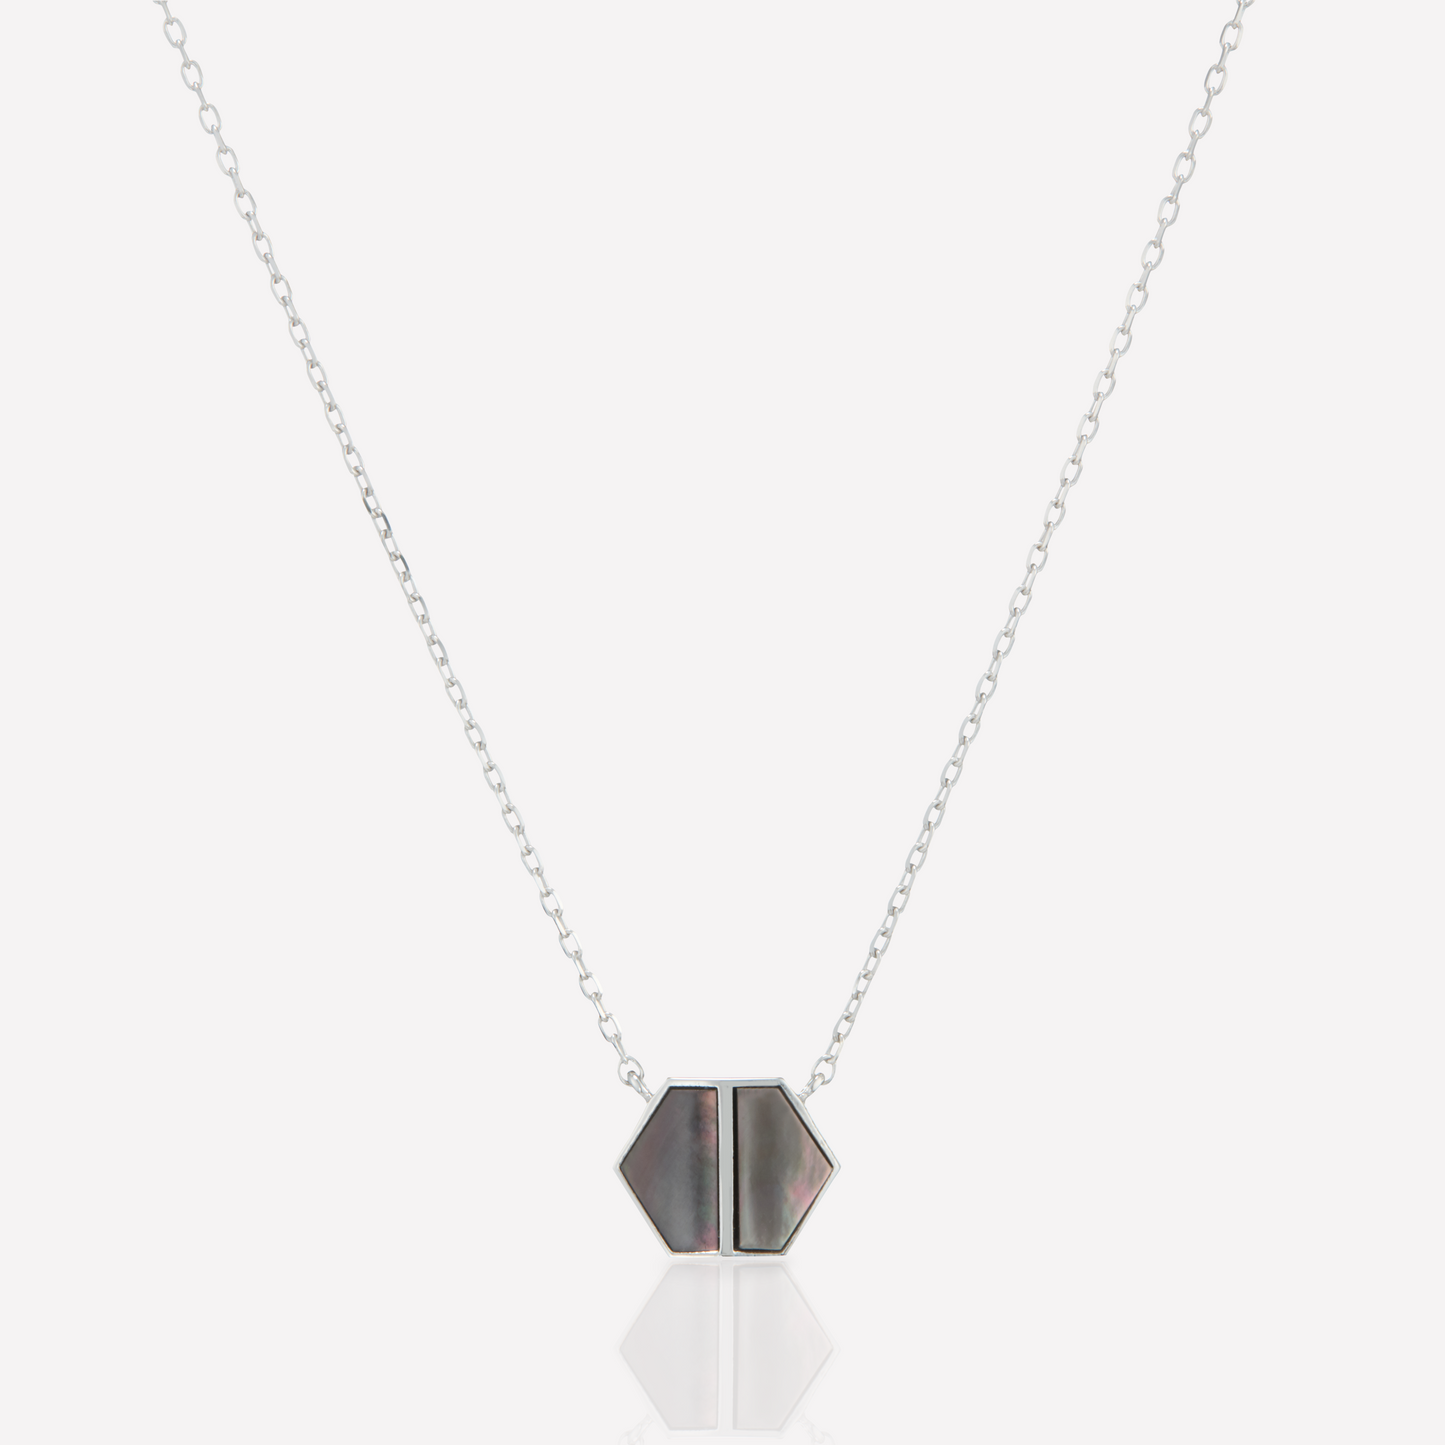 VOID Filled By You Necklace, Small, Black Nacre